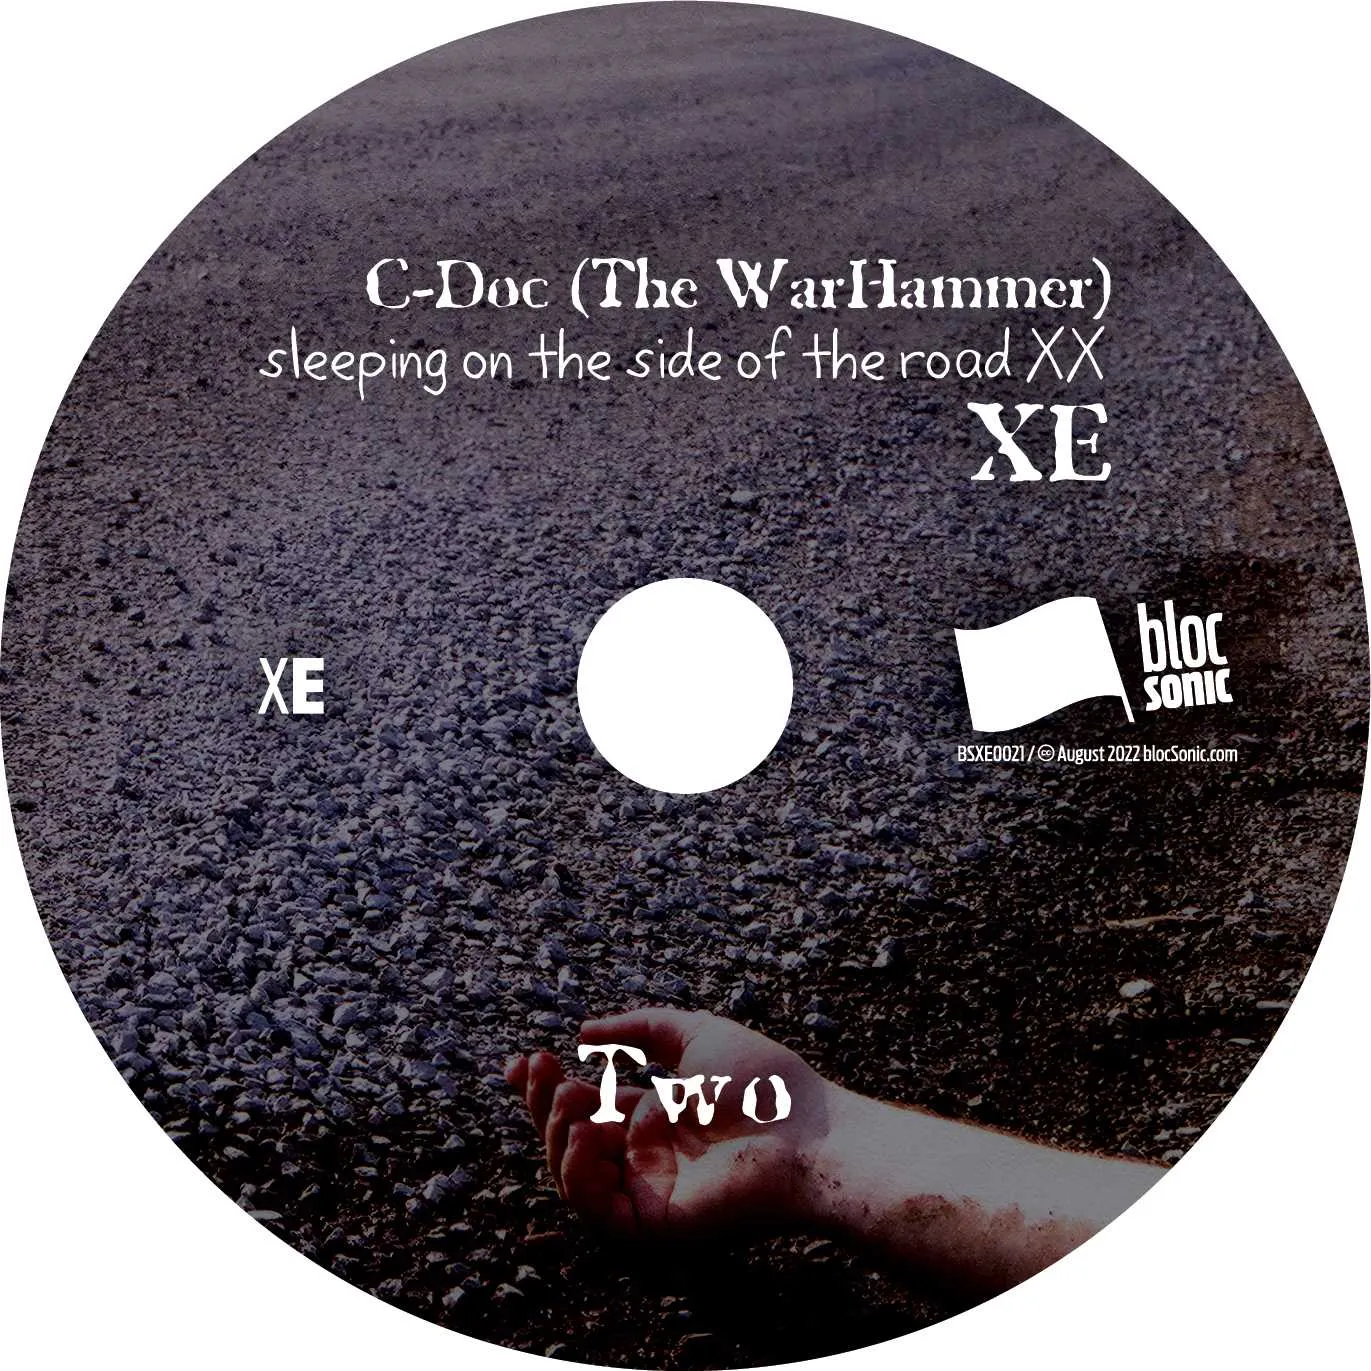 Album disc for “Sleeping On The Side Of The Road XX XE” by C-Doc